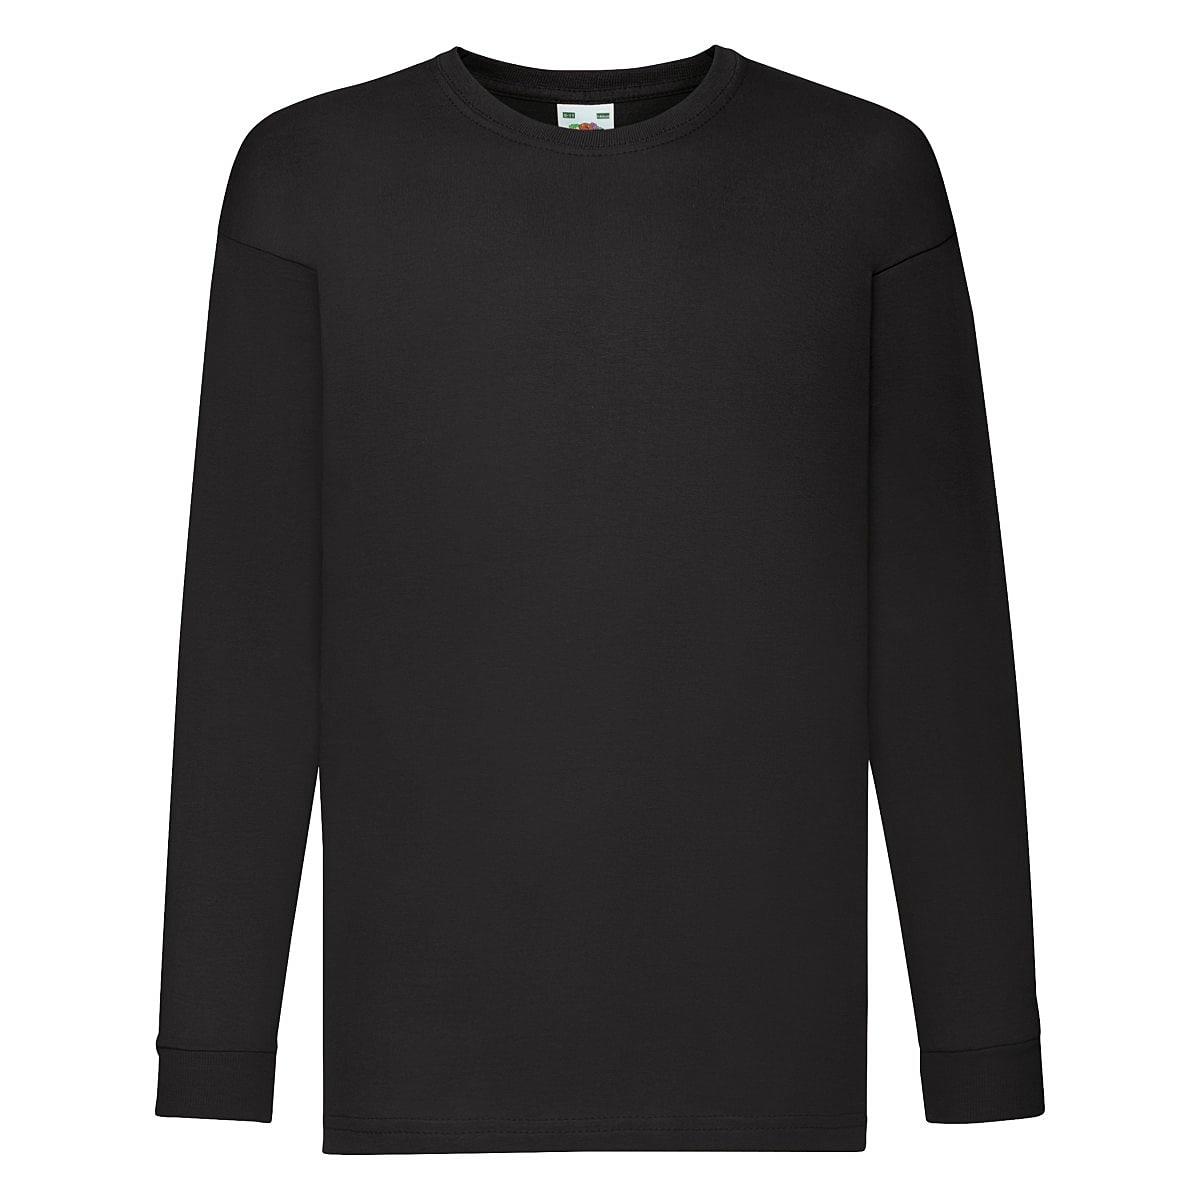 Fruit Of The Loom Childrens Valuweight Long-Sleeve T-Shirt in Black (Product Code: 61007)